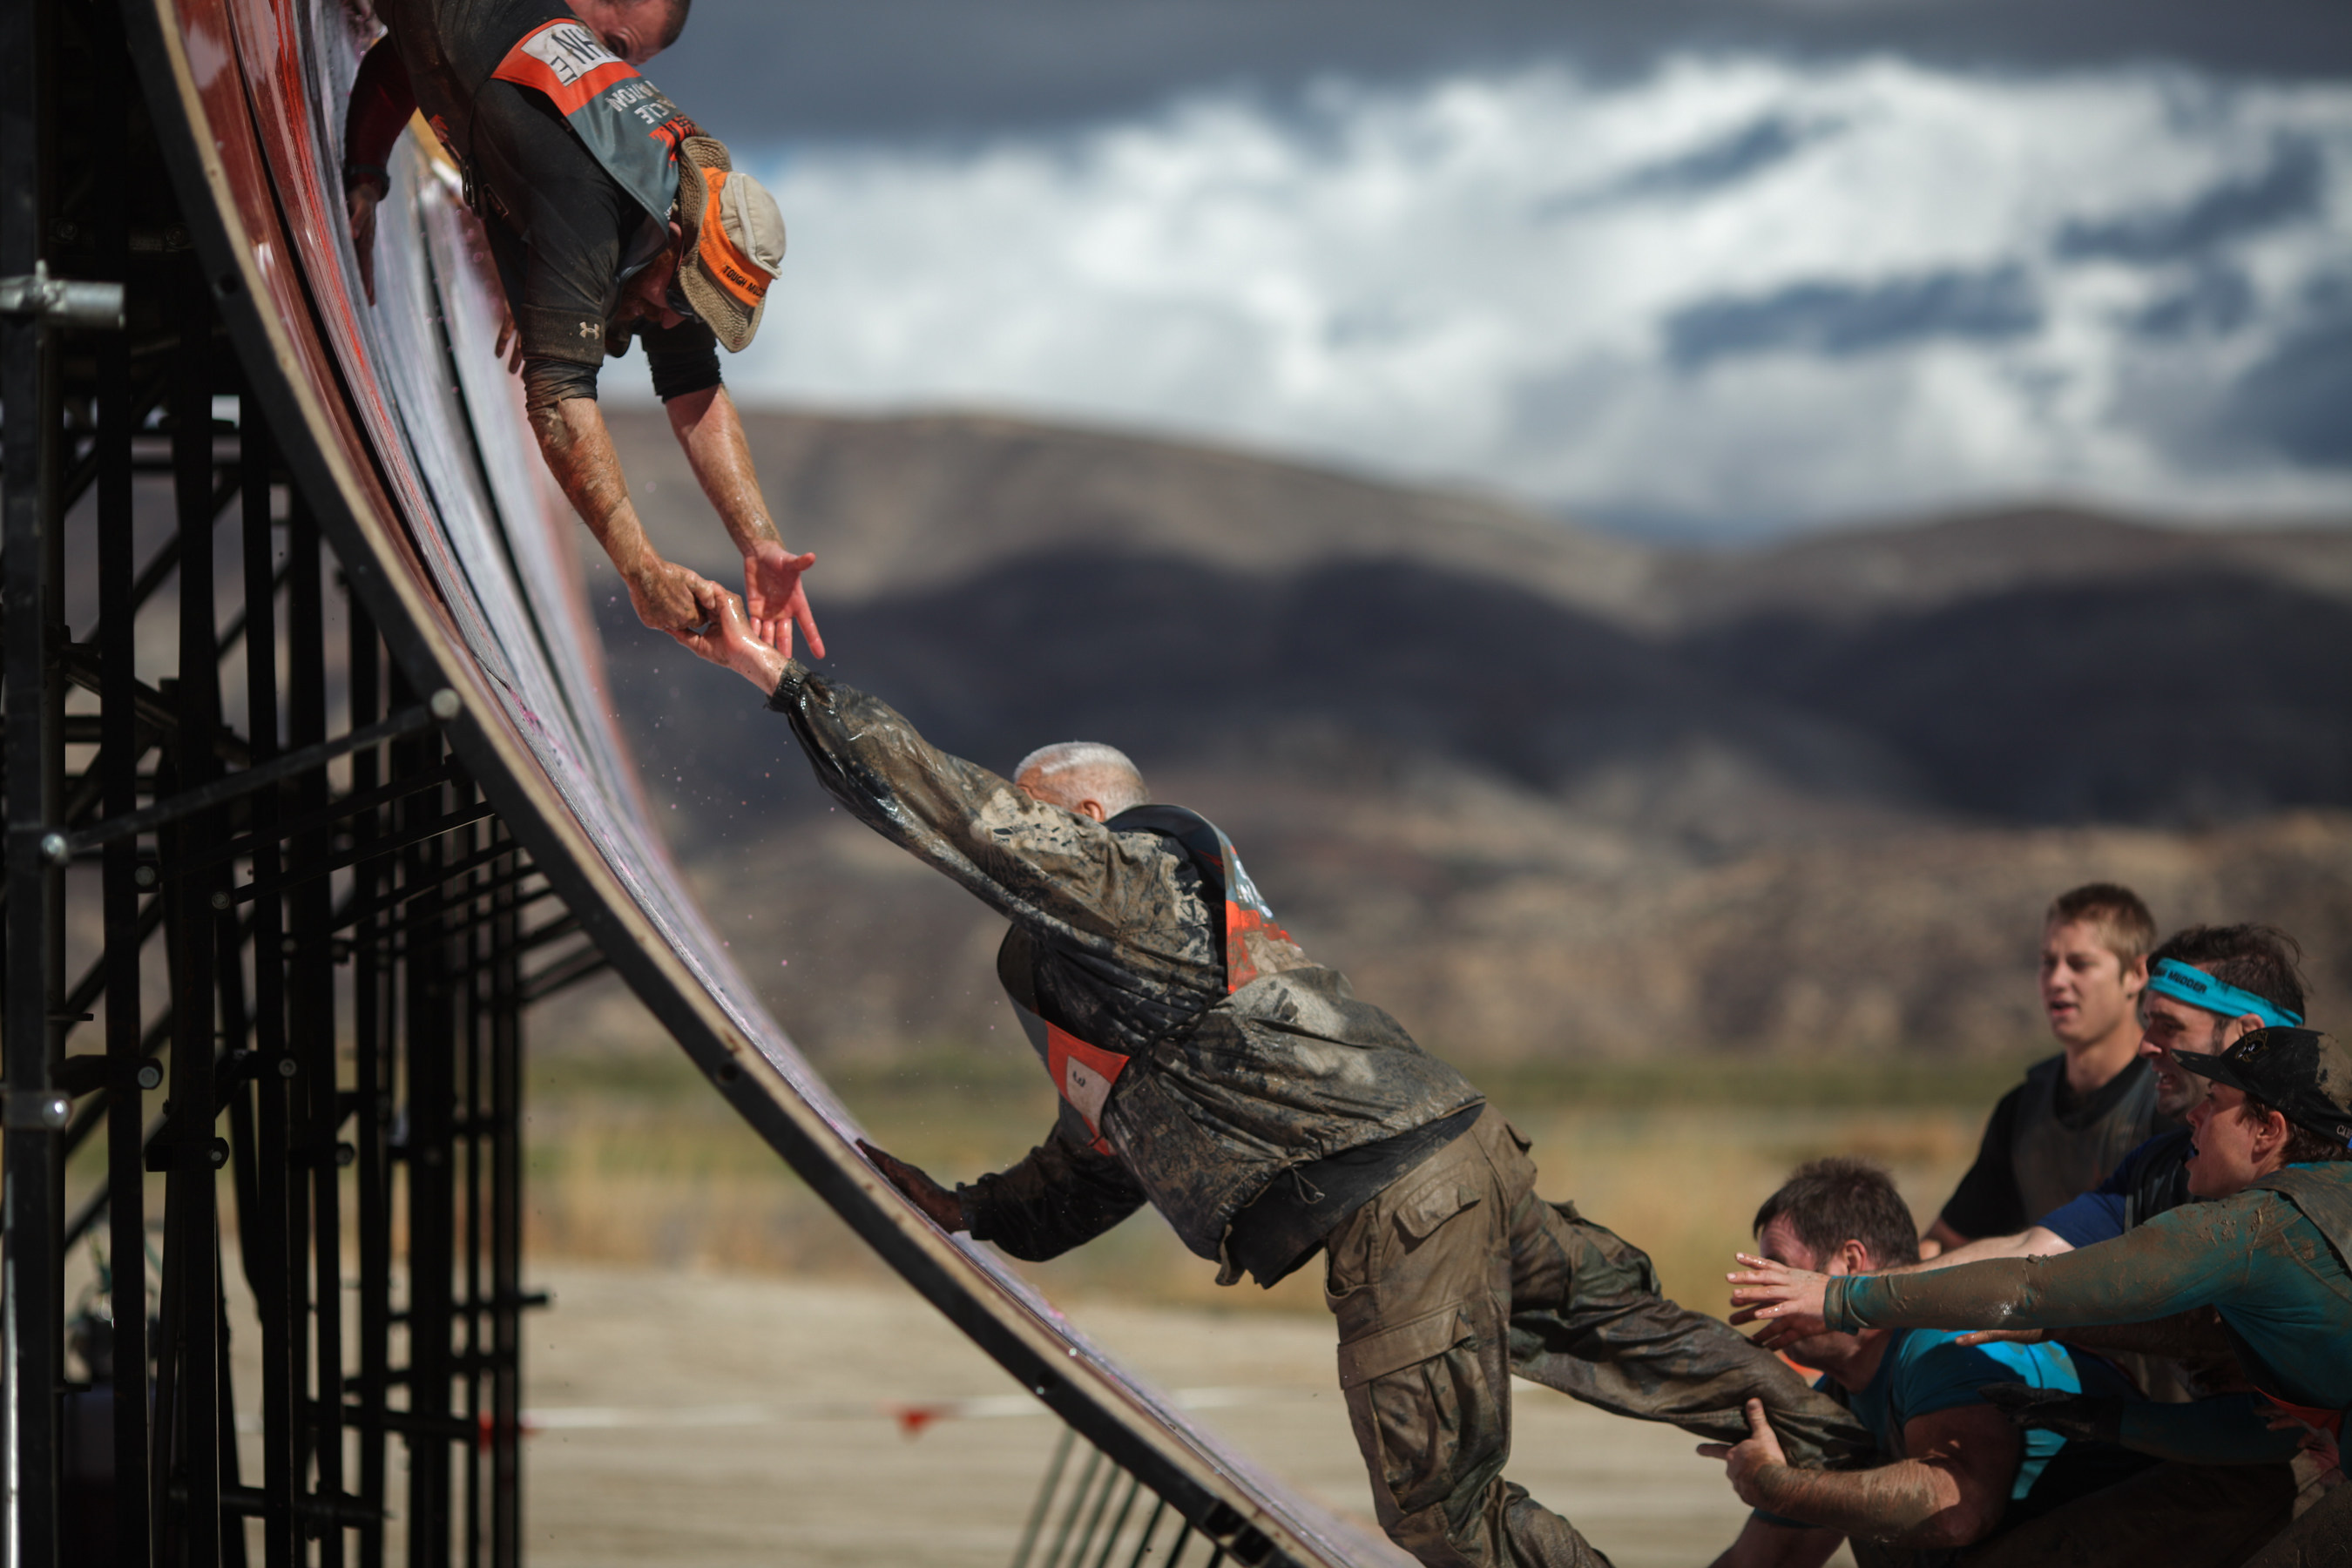 A slicked quarter pipe "Everest" is among the signature Tough Mudder obstacles that have been redesigned to further promote teamwork, complementing another ten exhilarating new obstacles that will hit Tough Mudder courses in 2015.